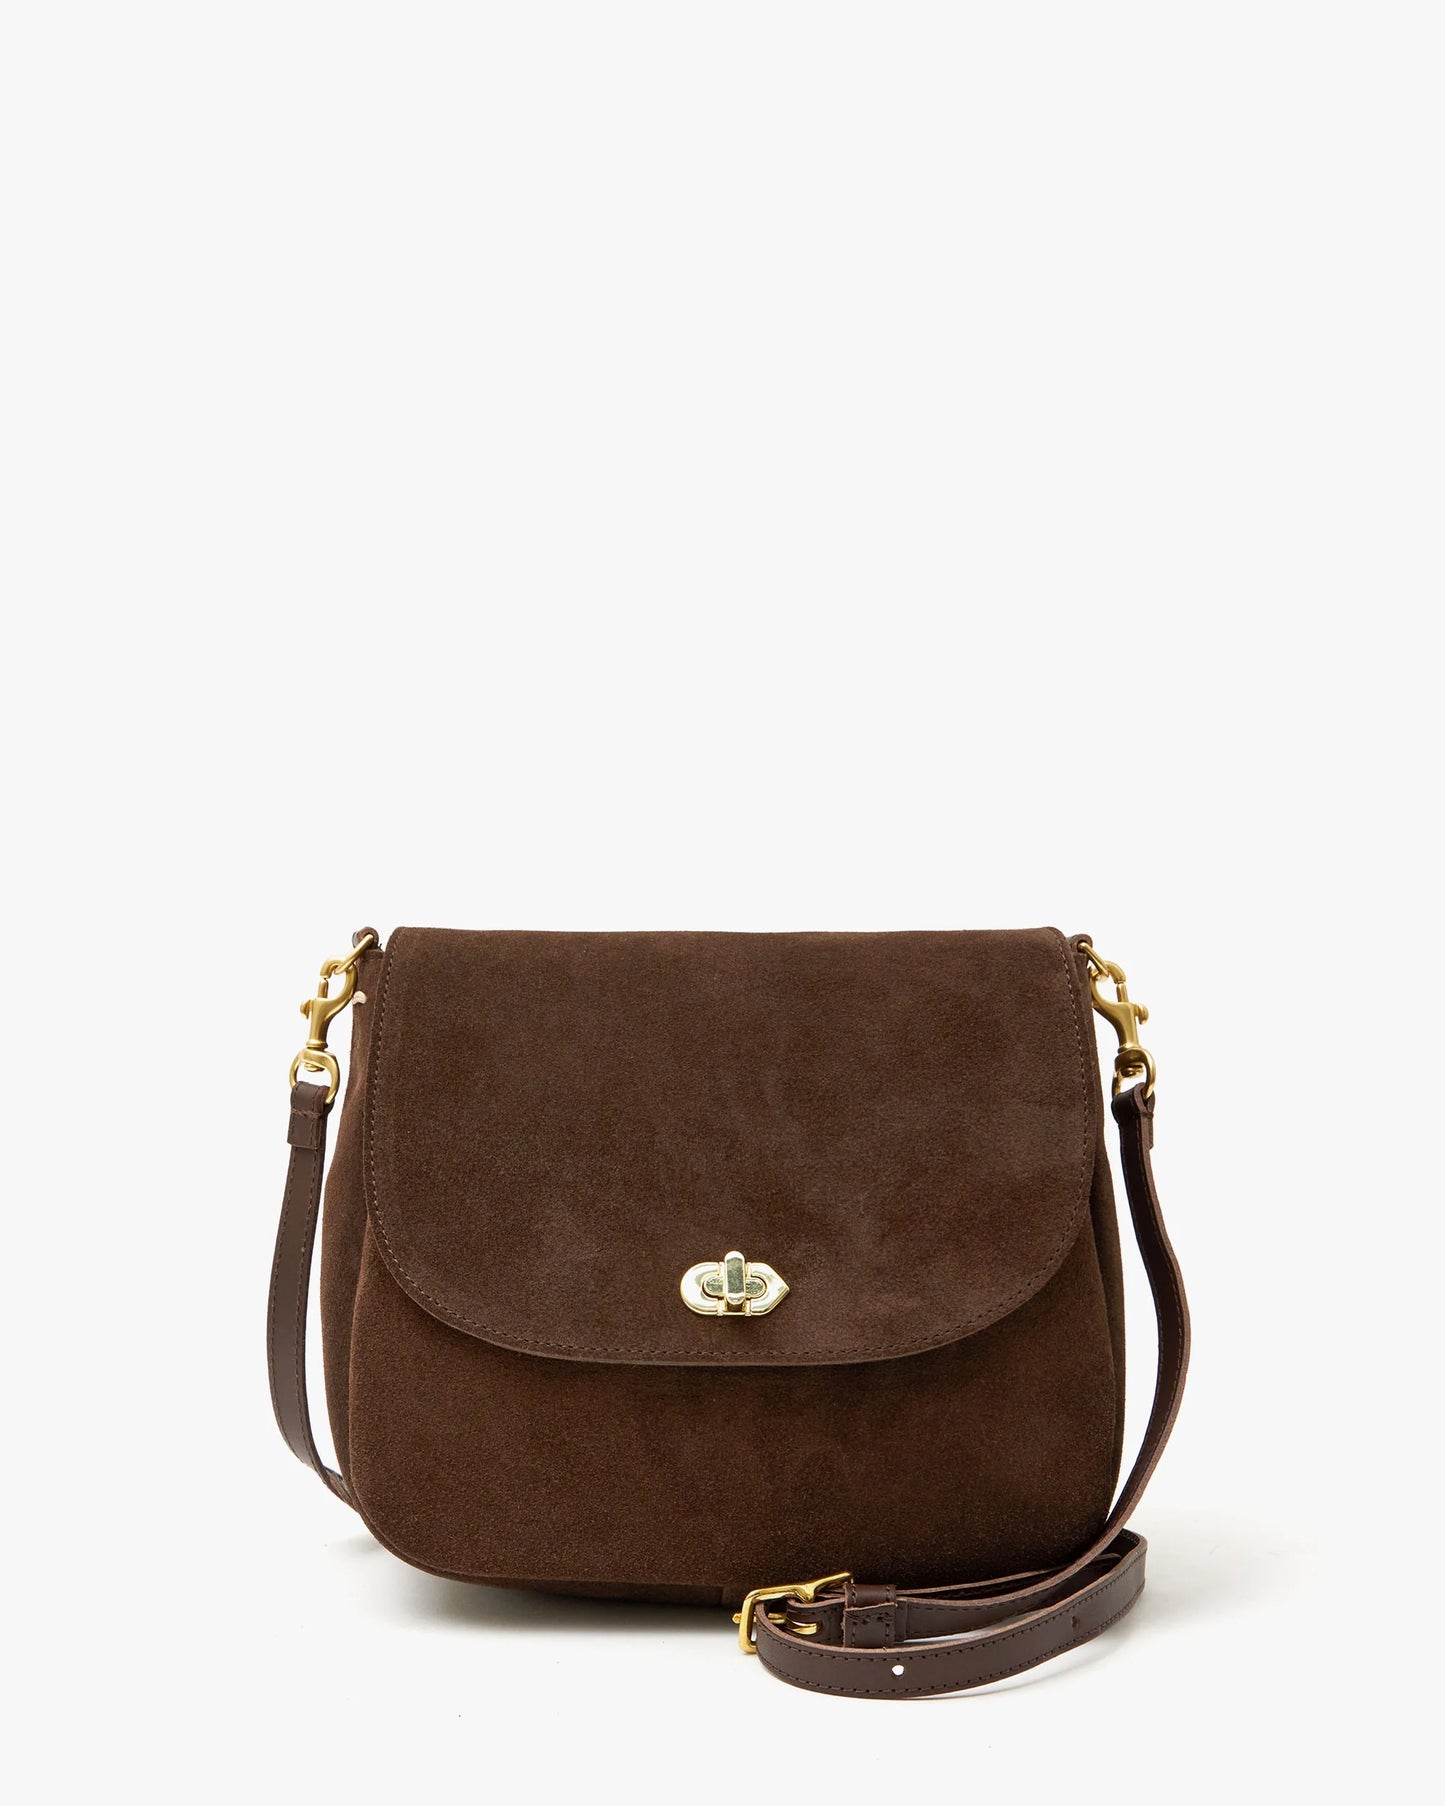 CLARE V. Turnlock Louis in Chocolate Suede